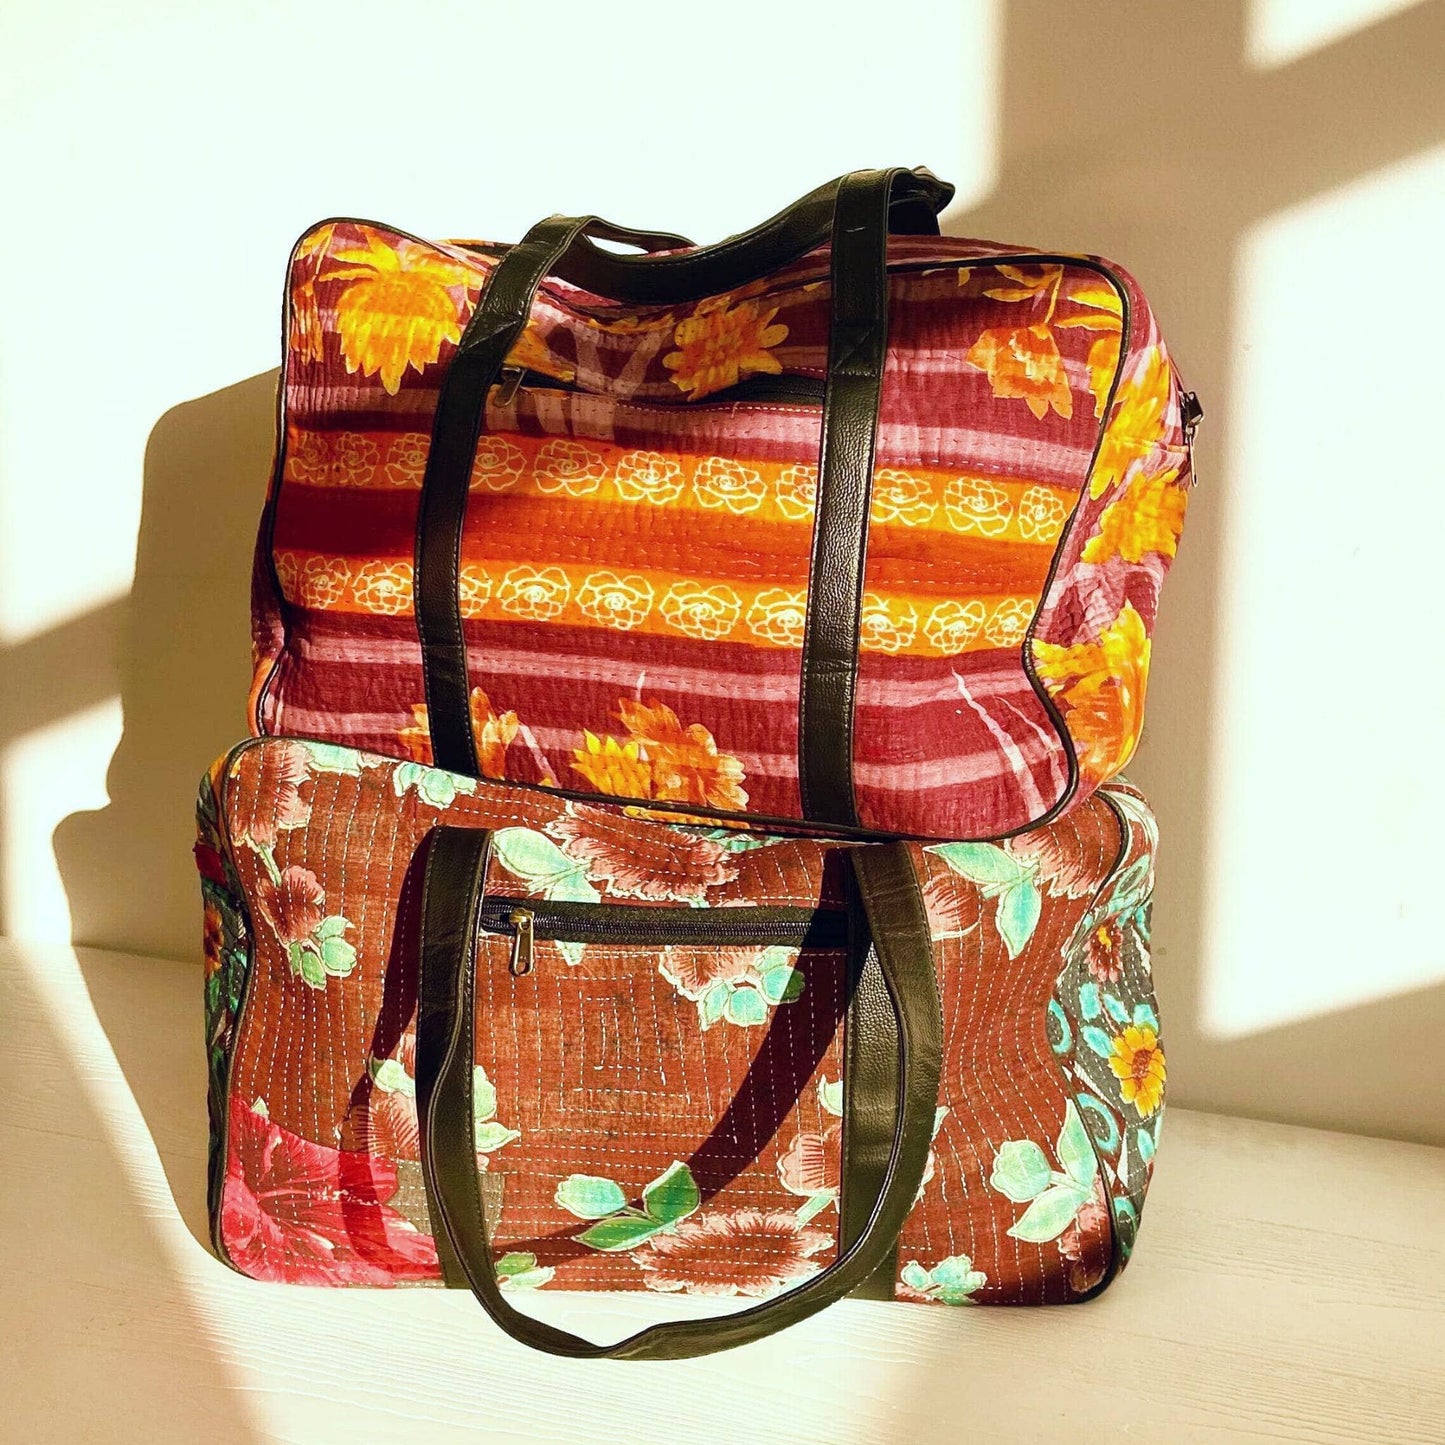 Two Kantha Duffle Bags Stacked on top of each other in the sunlight